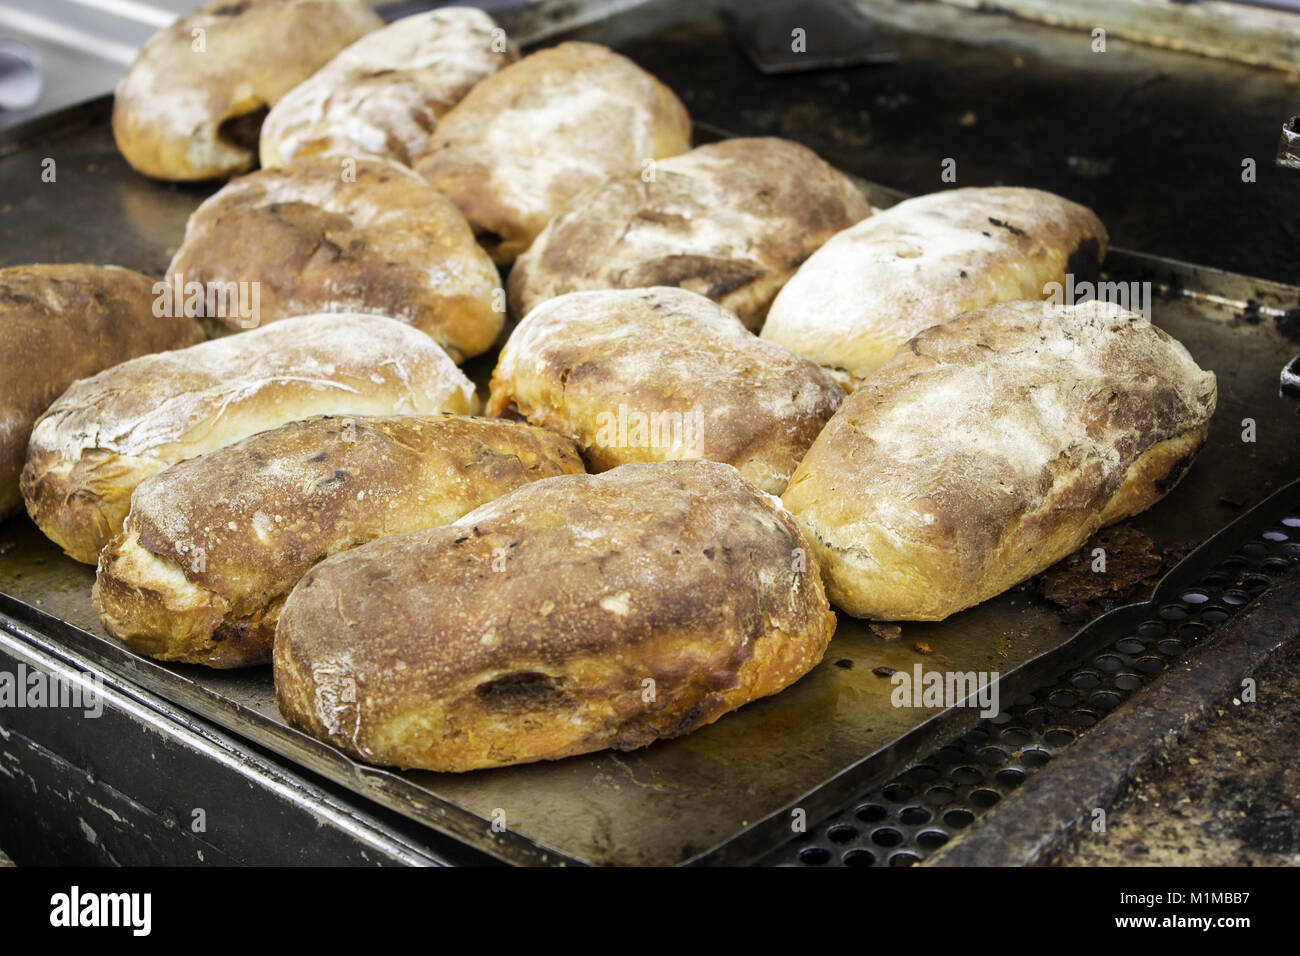 Stuffed sausage sandwich in restaurant, fast and insane food Stock Photo